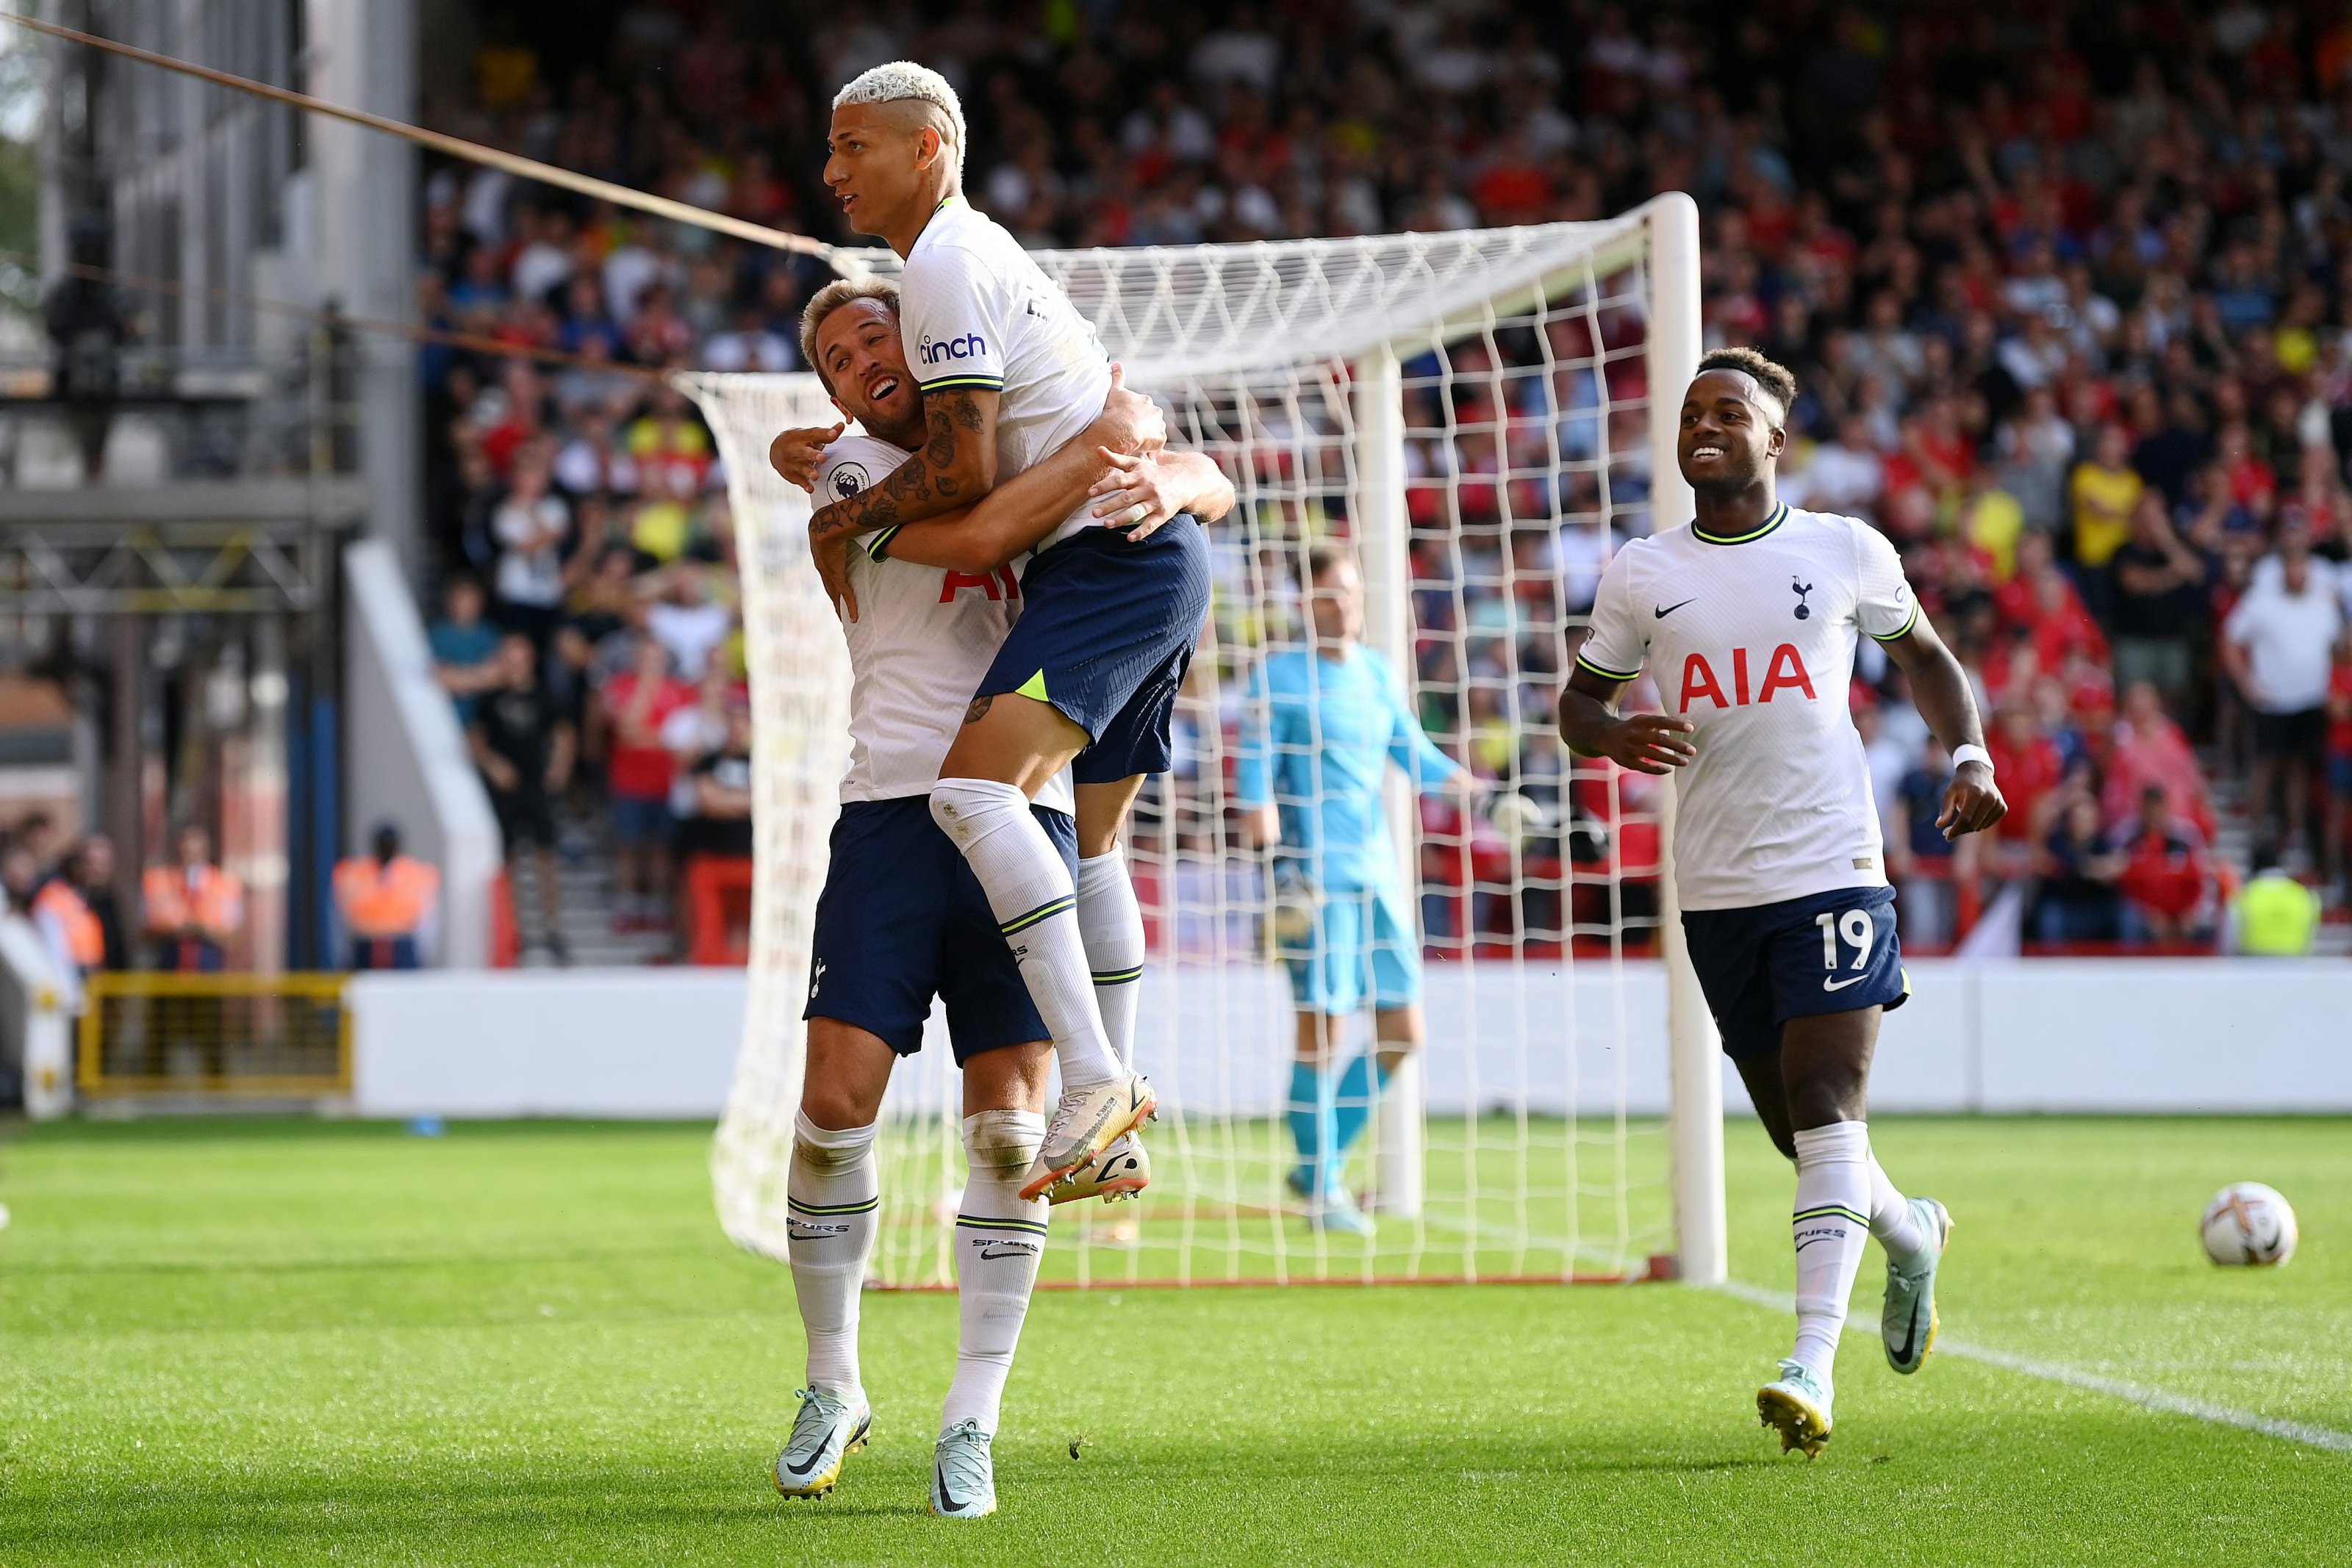 NOTTINGHAM, ENGLAND - AUGUST 28: Harry Kane of Tottenham Hotspur celebrates with Richarlison after scoring their team's second goal during the Premier League match between Nottingham Forest and Tottenham Hotspur at City Ground on August 28, 2022 in Nottingham, England. (Photo by Michael Regan/Getty Images)